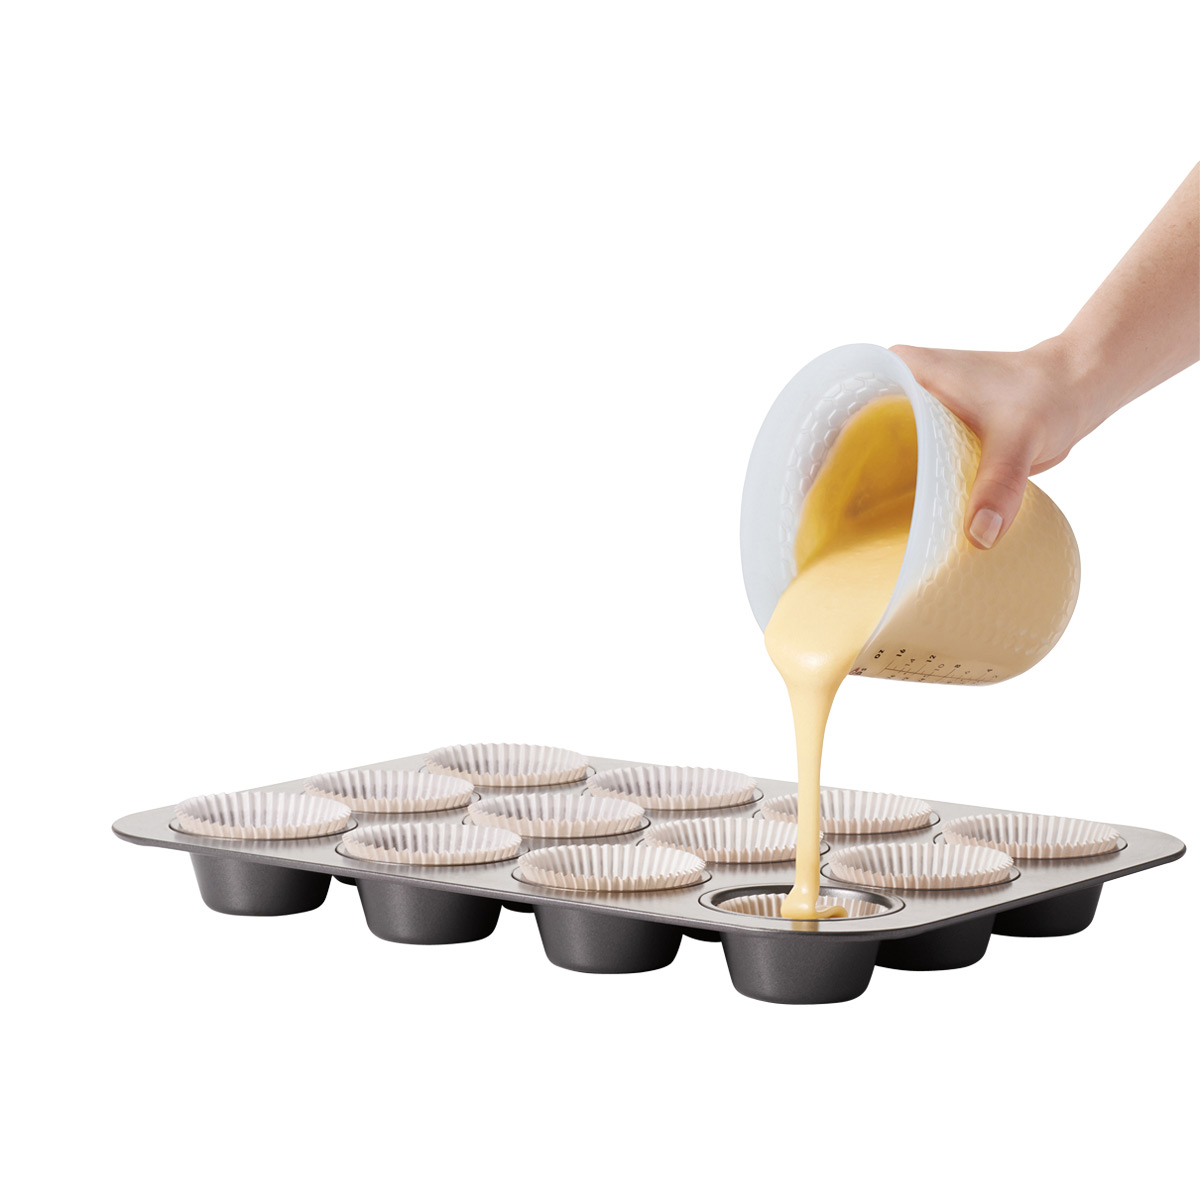 https://www.containerstore.com/catalogimages/332396/10073557-OXO-Good-Grips-Squeeze-Pour.jpg